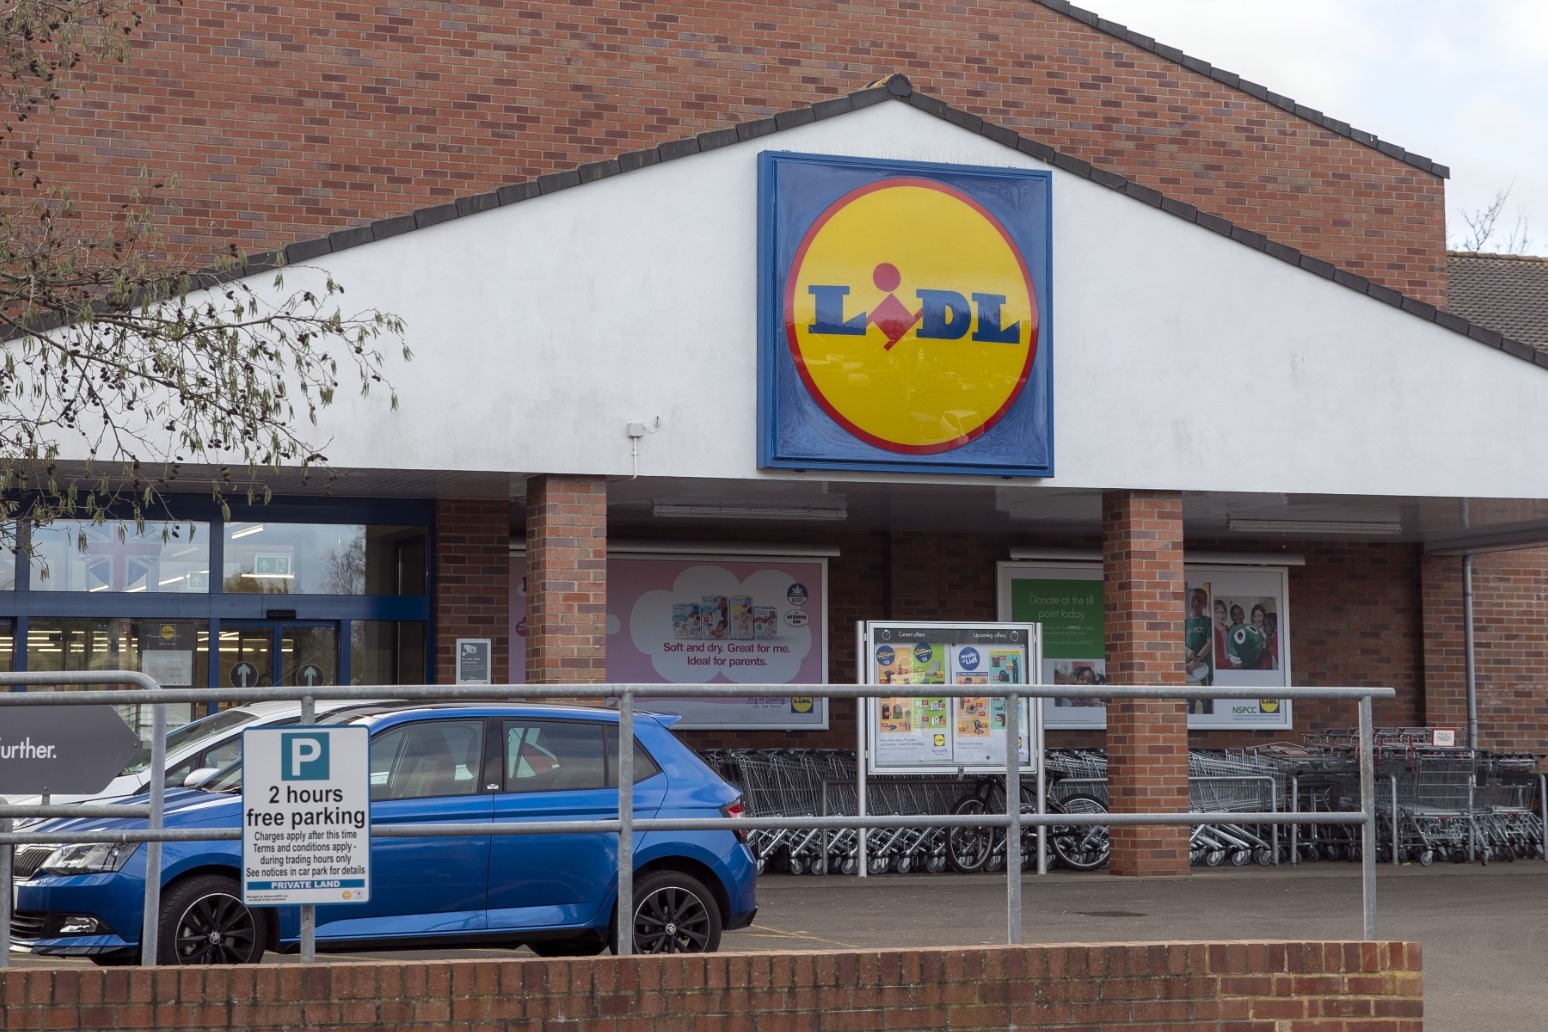 Christmas jumper proves hit for Lidl as festive sales rise